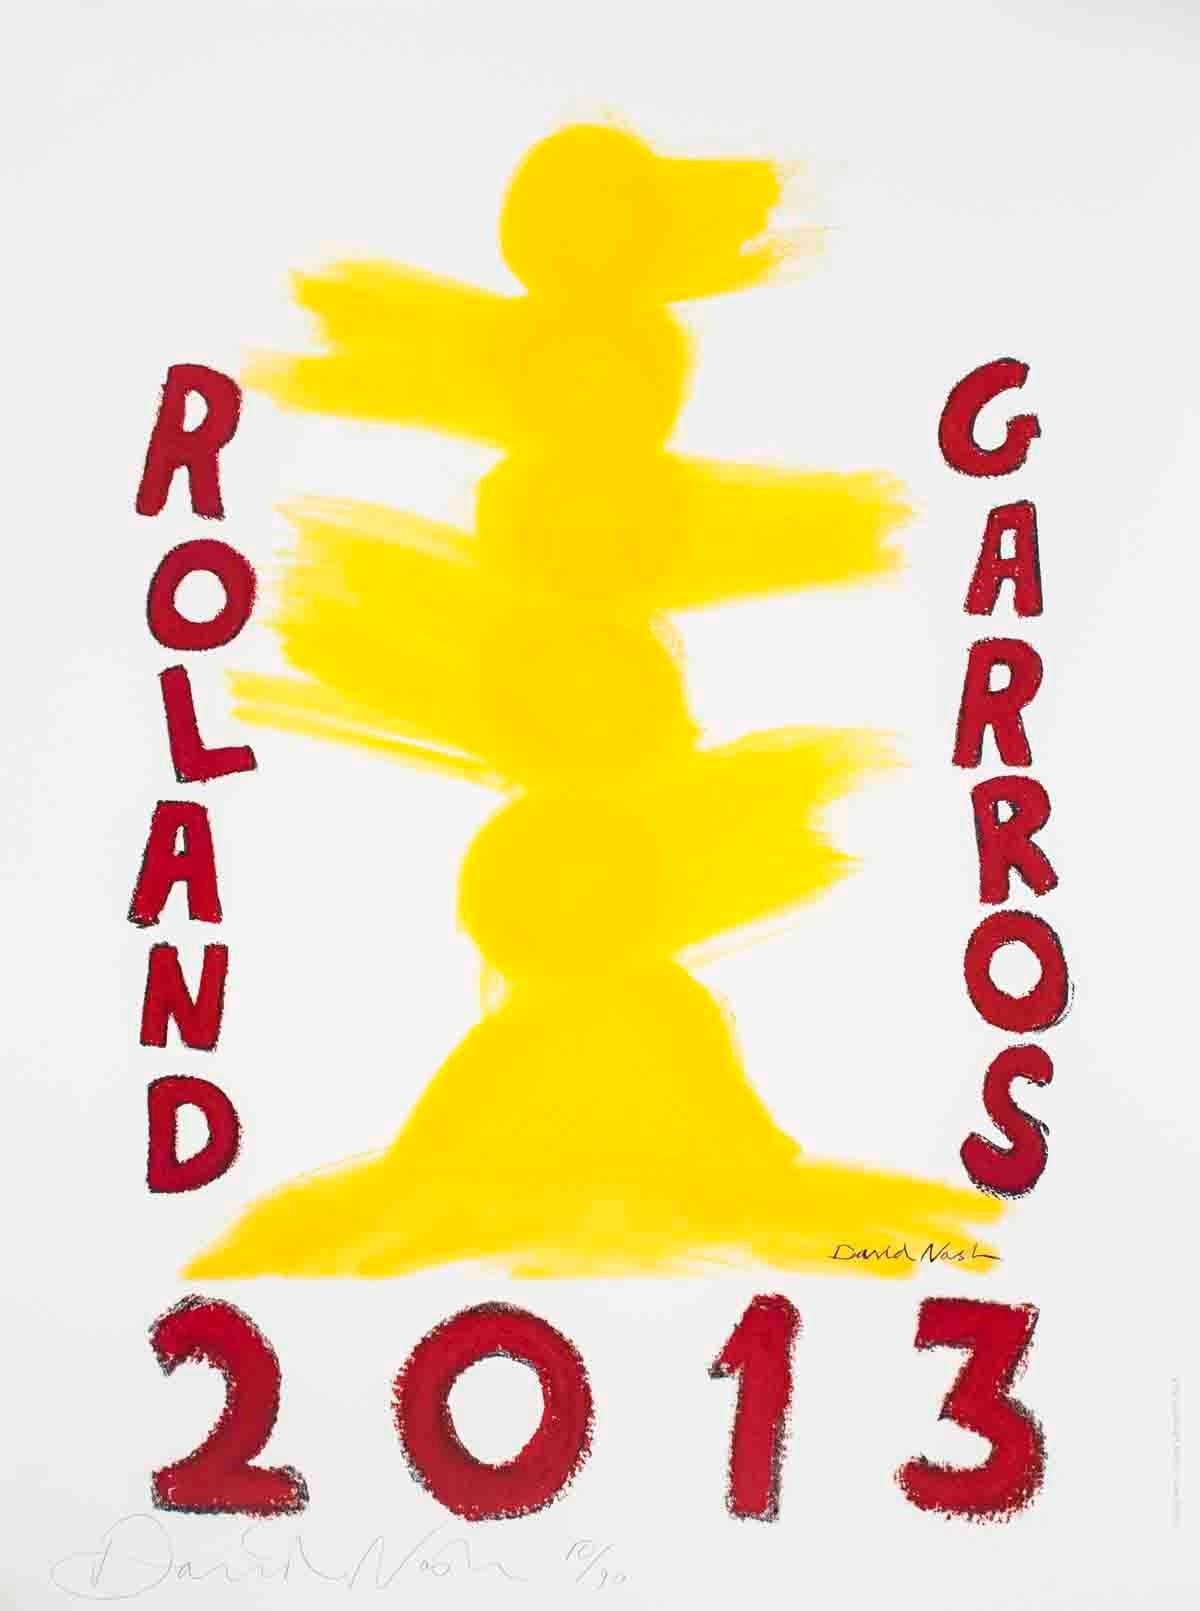 Official poster designed and created for the  French Open tennis tournament held at Roland Garros every year. The poster is a limited edition of 1000. First edition, signed and numbered out of 90. 
